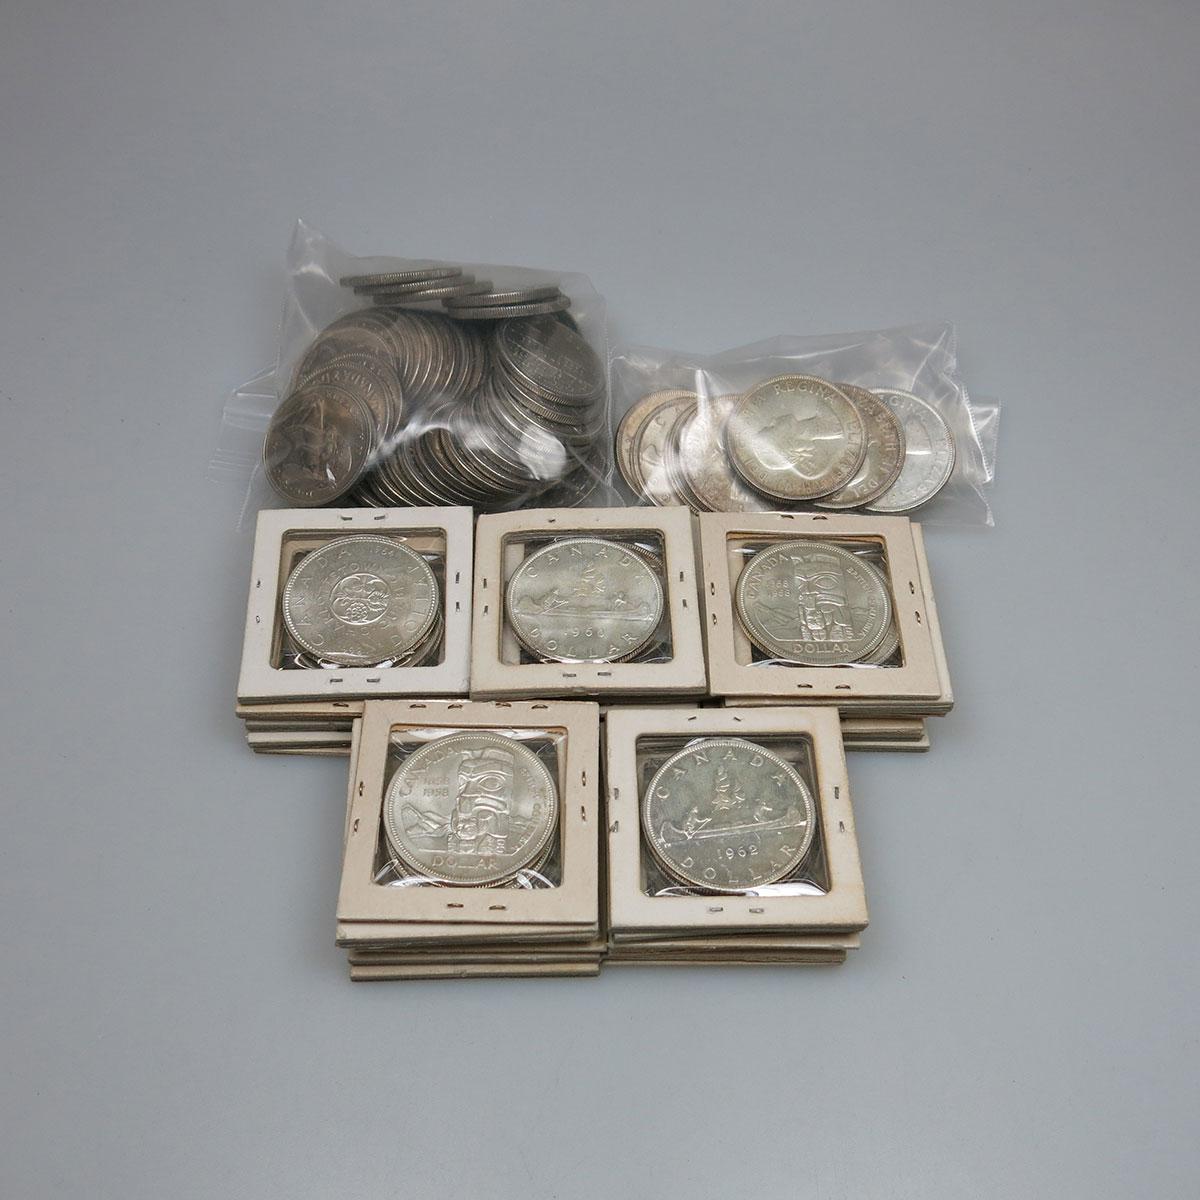 42 Canadian Silver Dollars